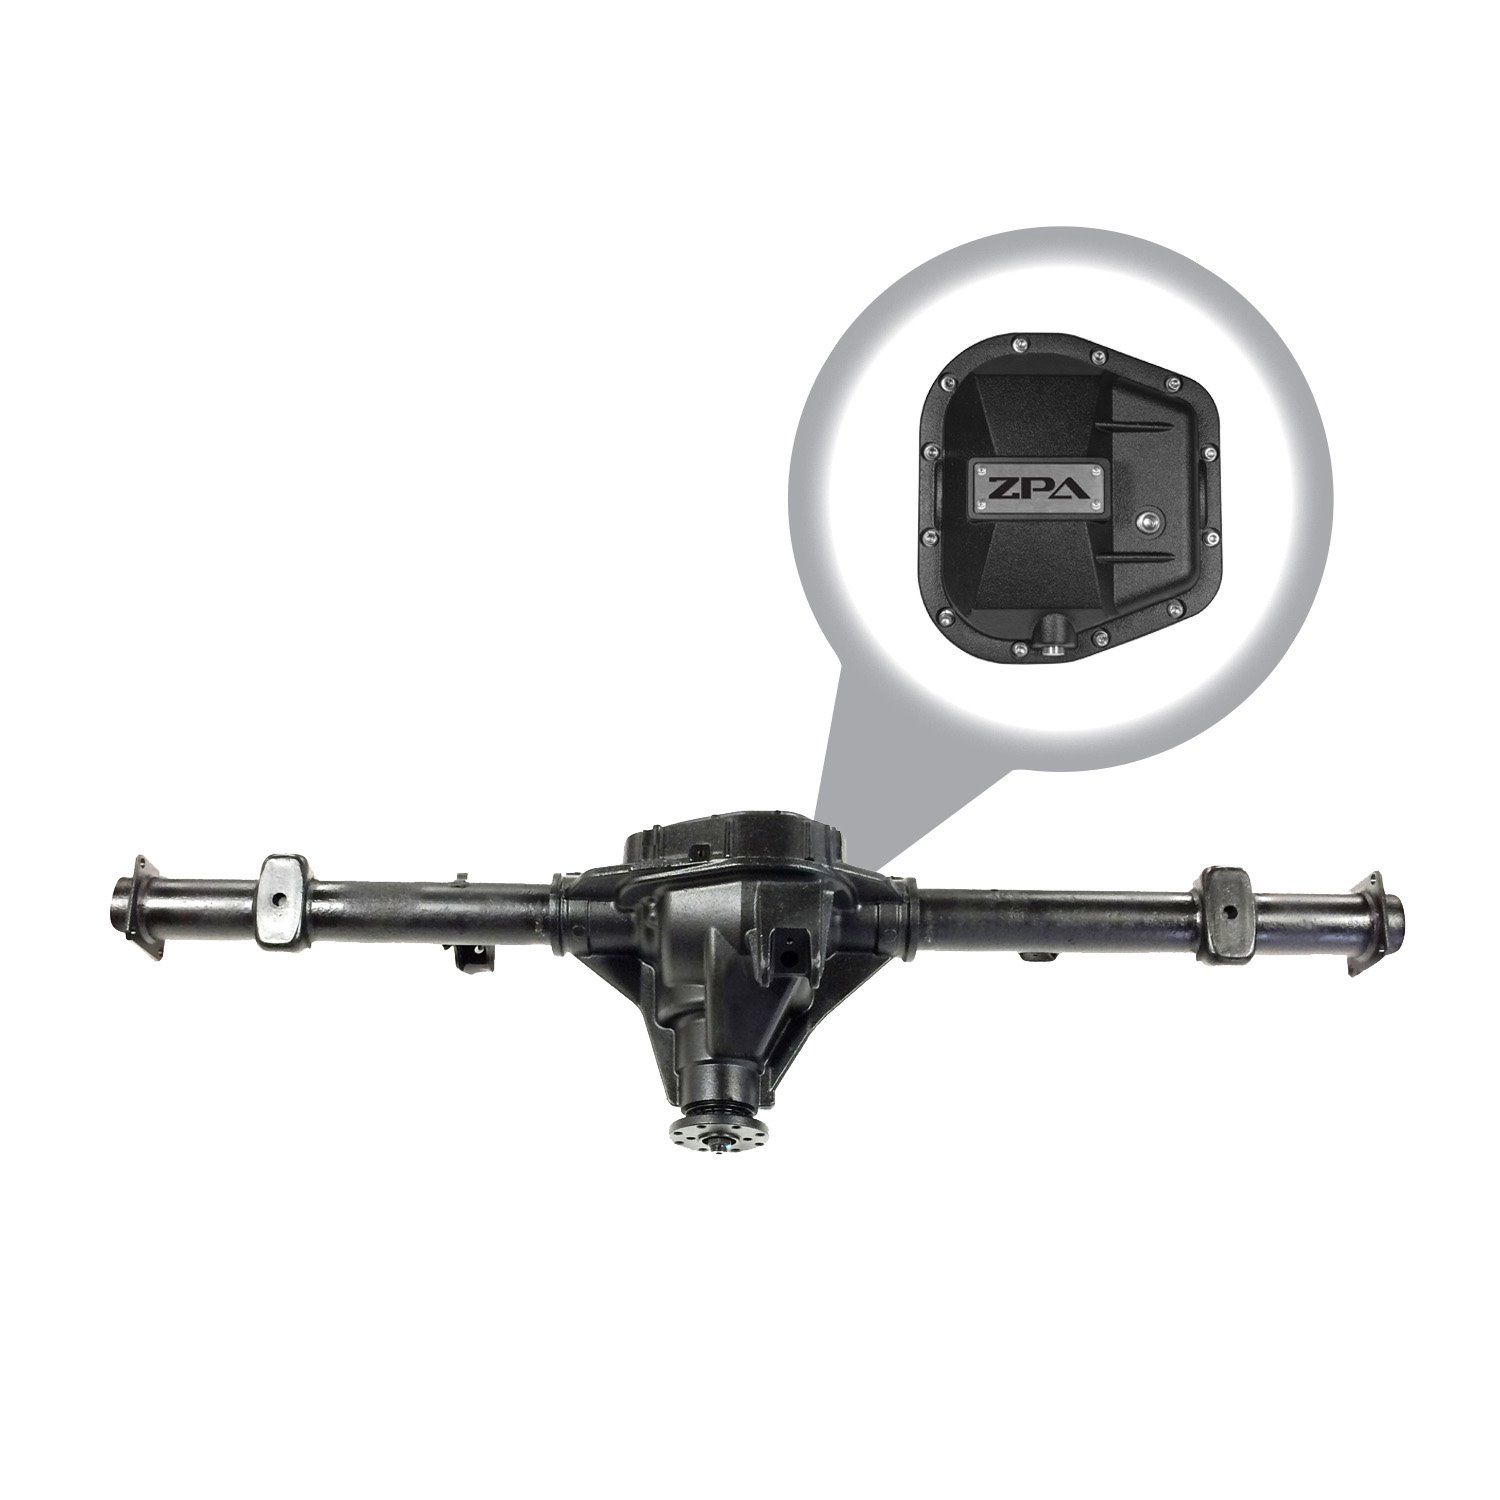 RAA435-2209X3-P Rear Axle Assembly, Ford 9.75, '04-'08 Ford F150 (Exc Heritge), 4.88 Ratio, Duragrip